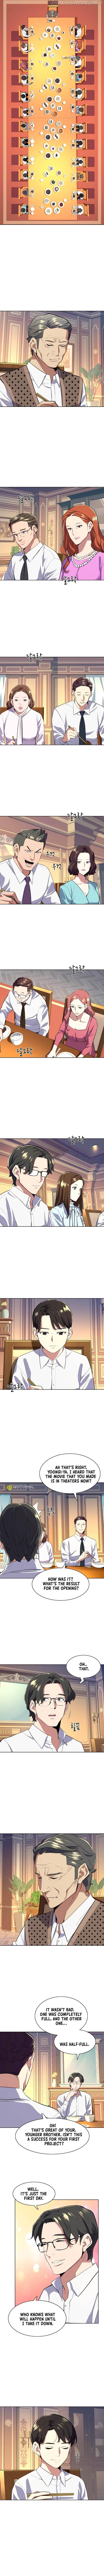 The Chaebeol’s Youngest Son chapter 12